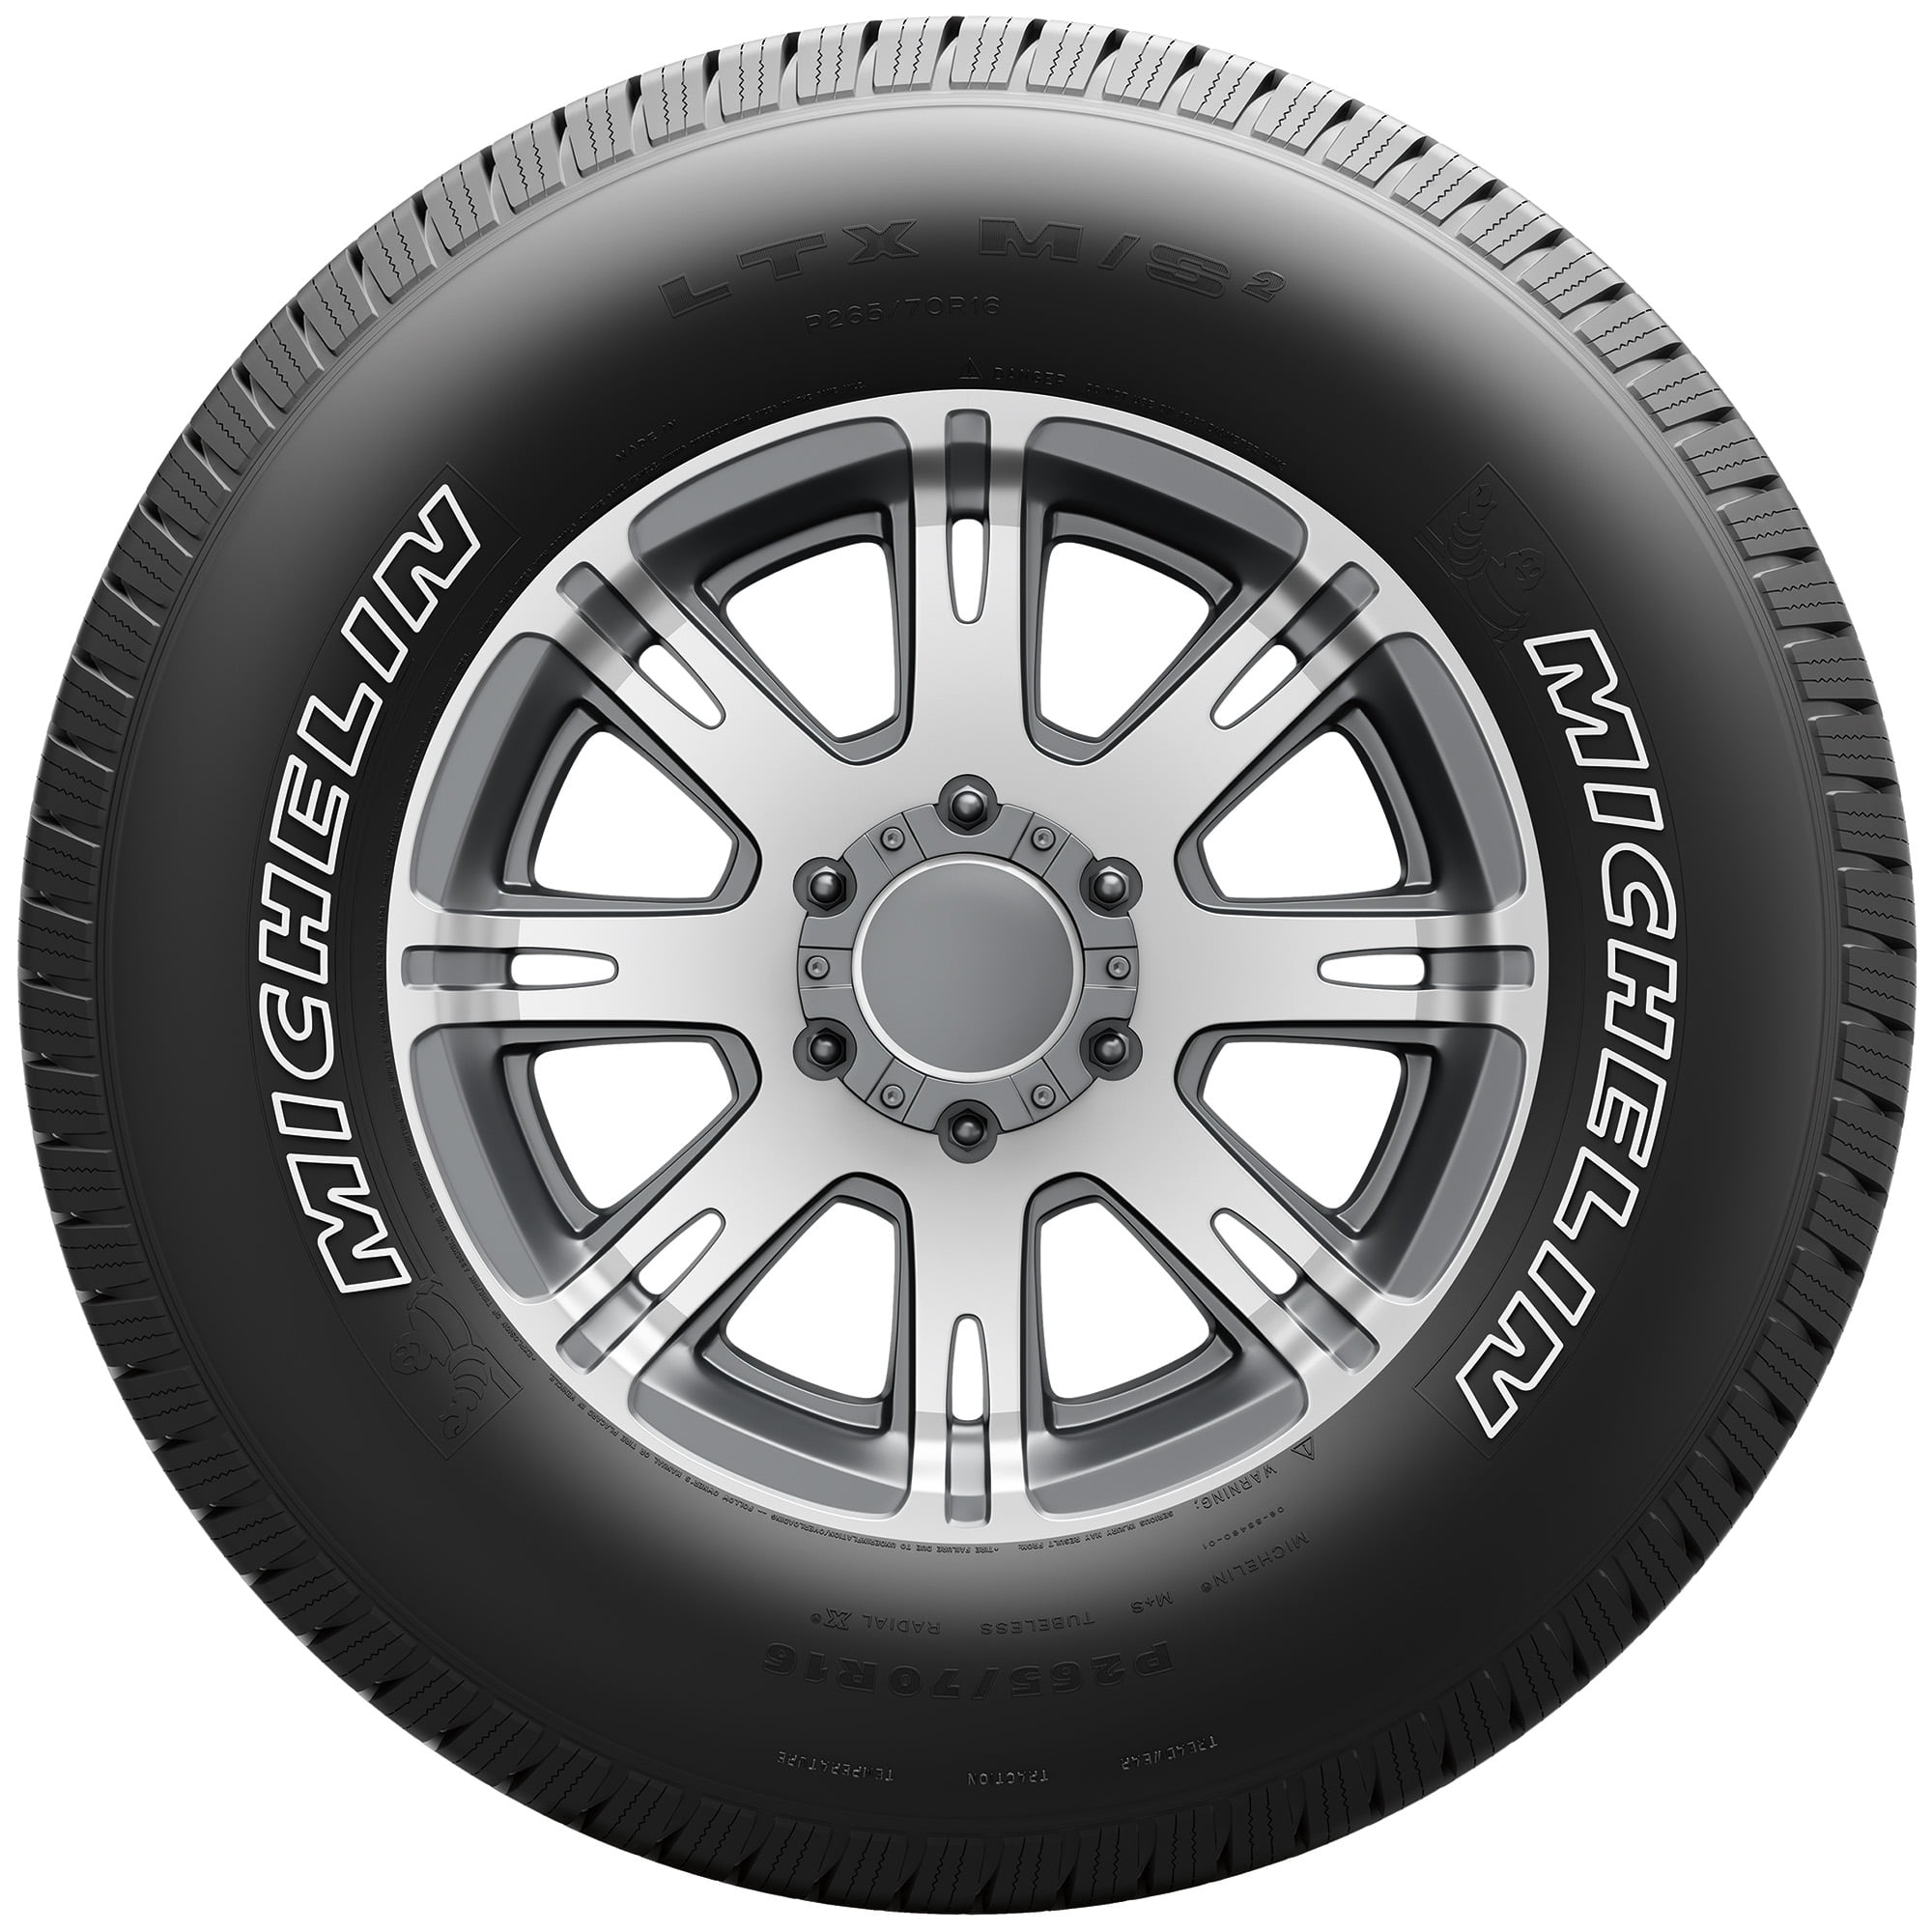 buy-michelin-ltx-m-s2-all-season-275-55r20-113h-tire-online-at-lowest